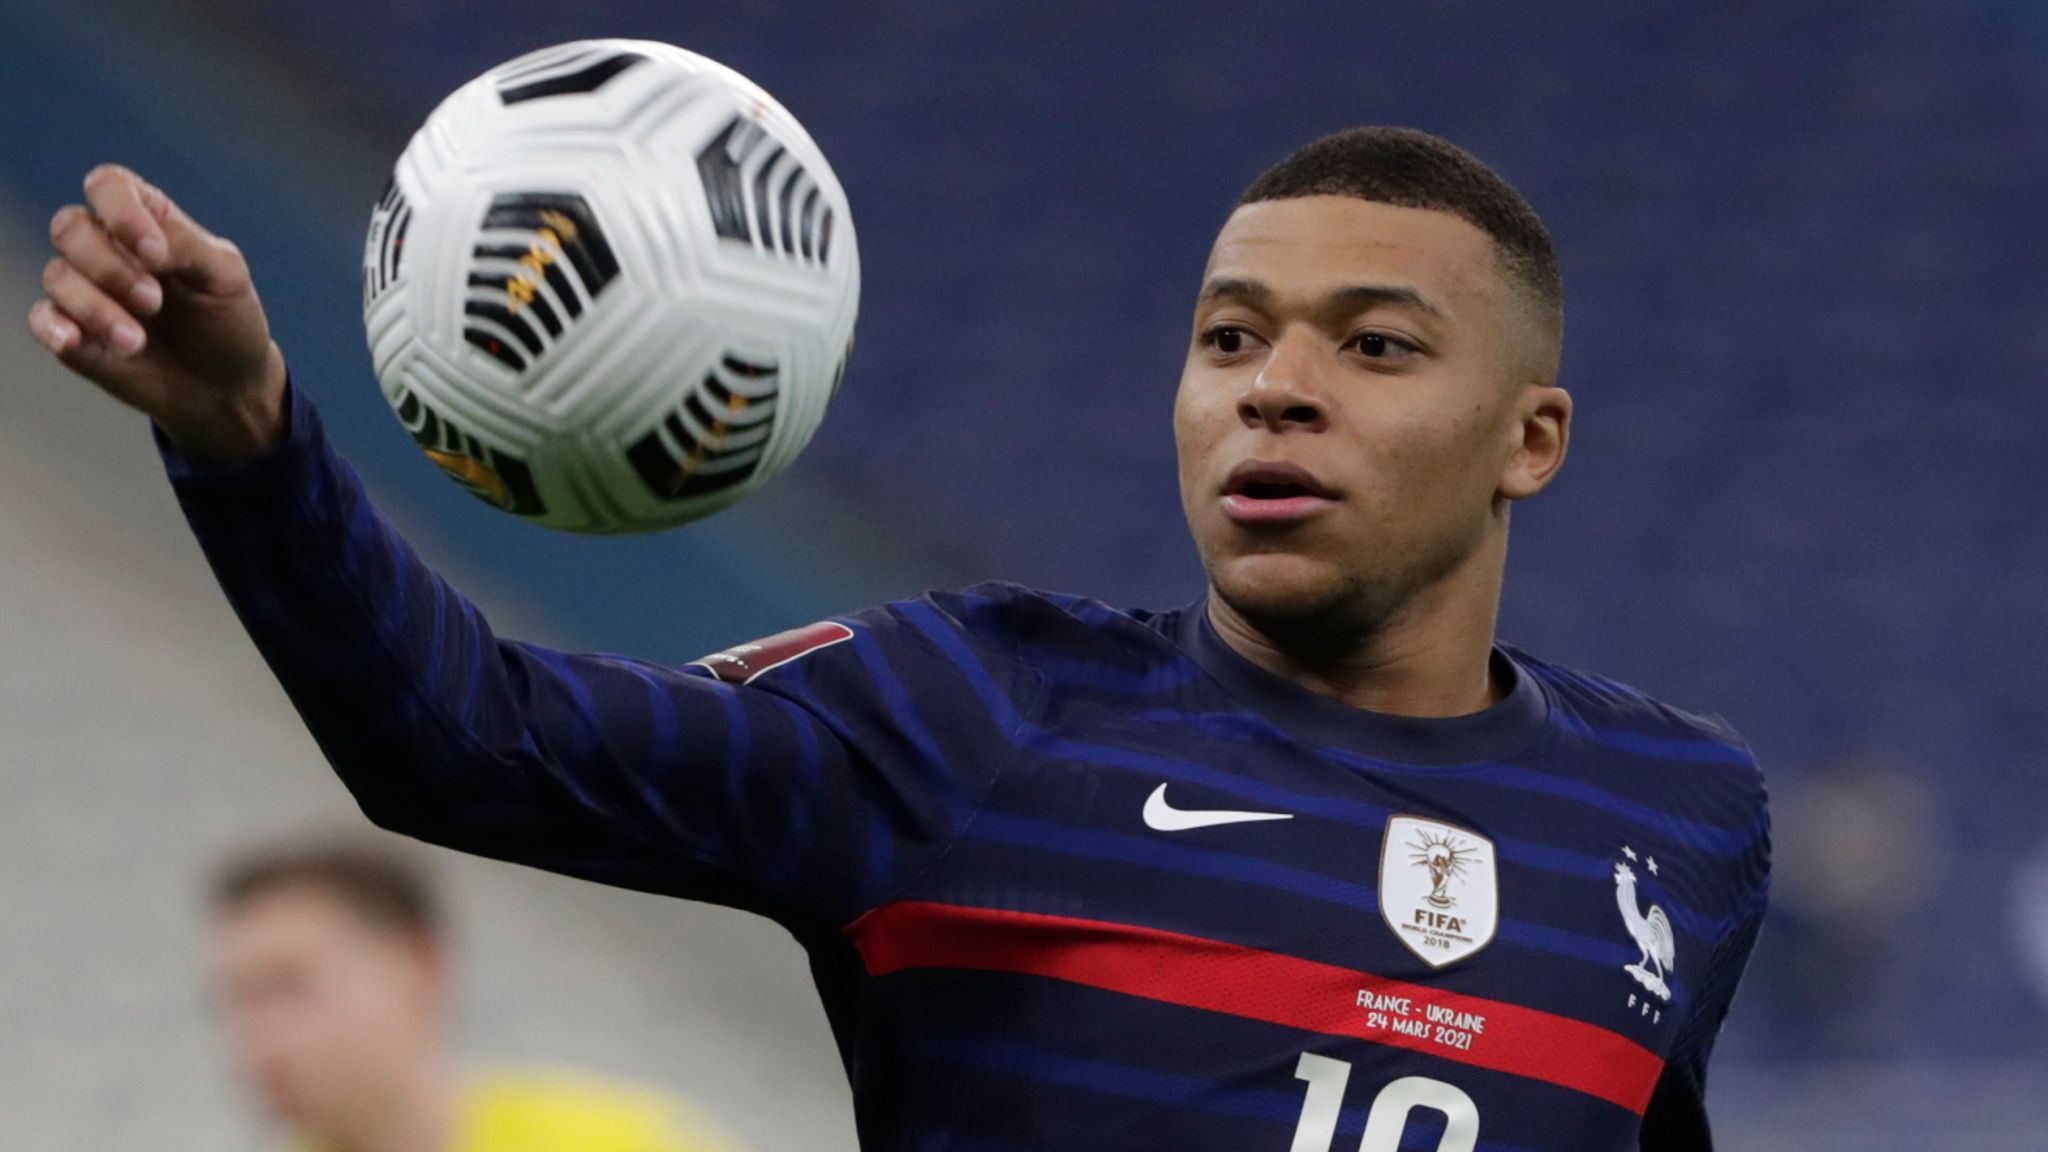 PSG forward Kylian Mbappé is reported to have a net worth of over $100 million, a huge money for a young player but is he the richest French footballer?
 